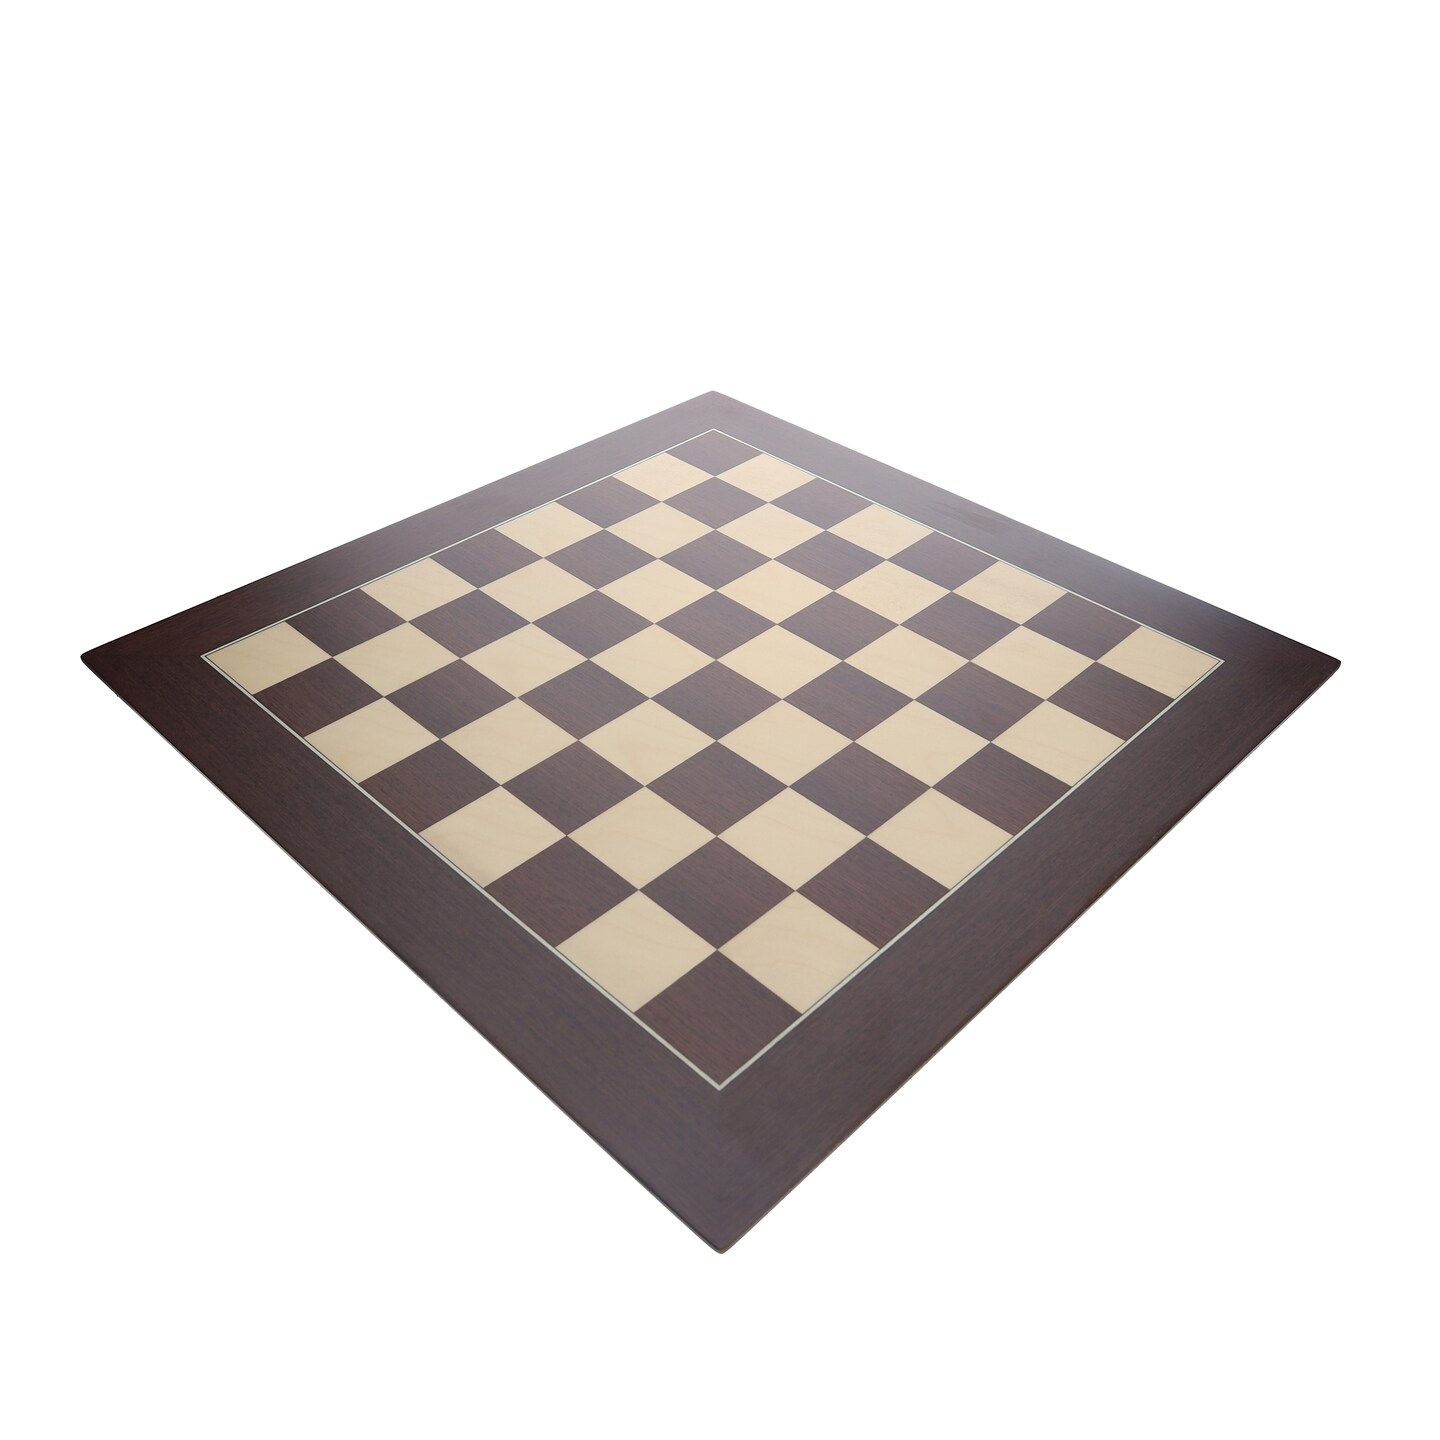 WE Games Deluxe Wenge and Sycamore Wooden Chess Board - 21.625 inches